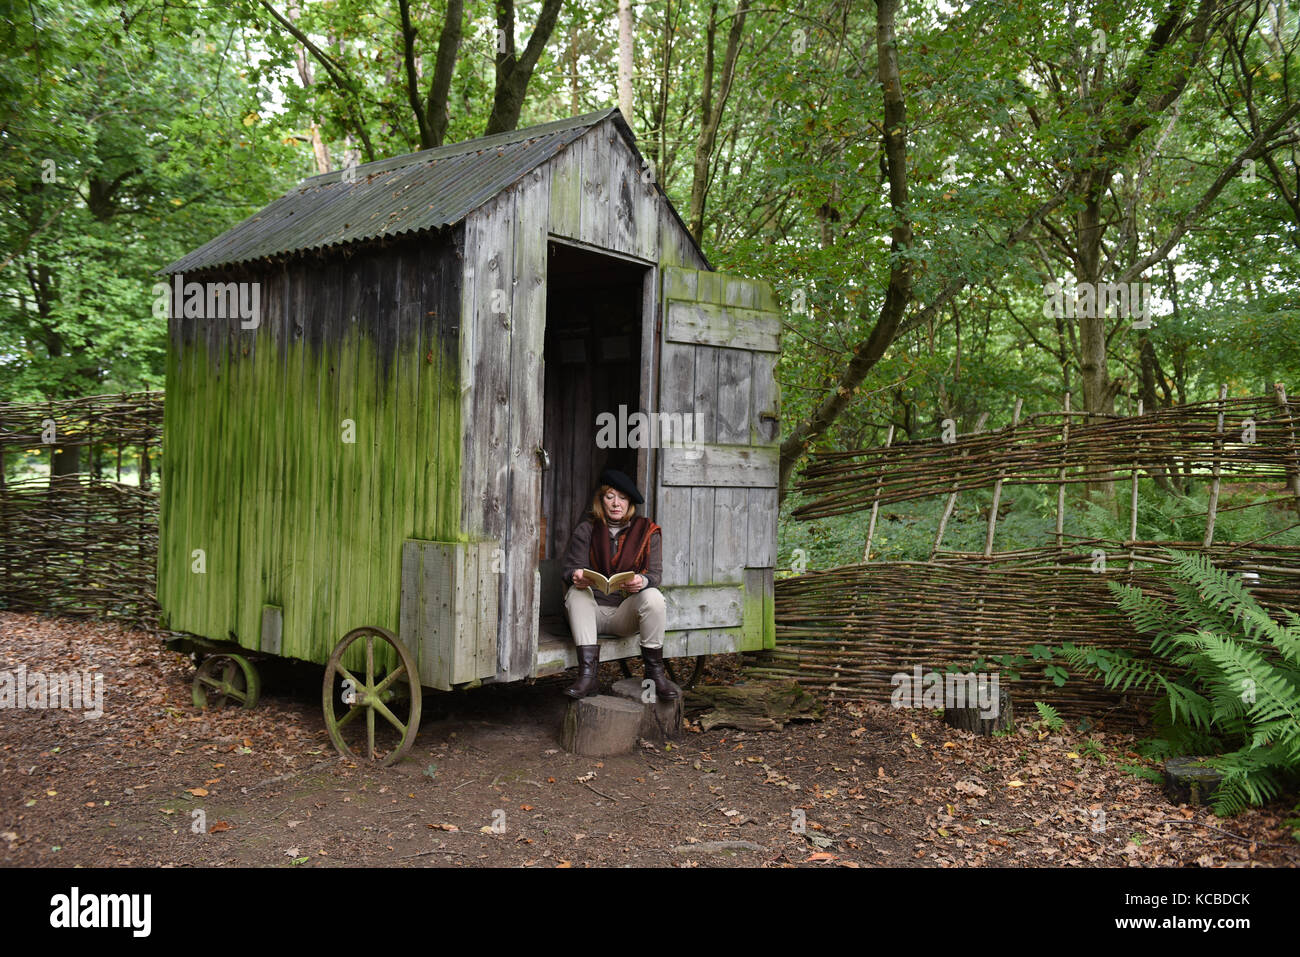 Woman relaxing at woodland garden shed on wheels Britain Uk secluded seclusion isolation hideaway rural retreat Stock Photo